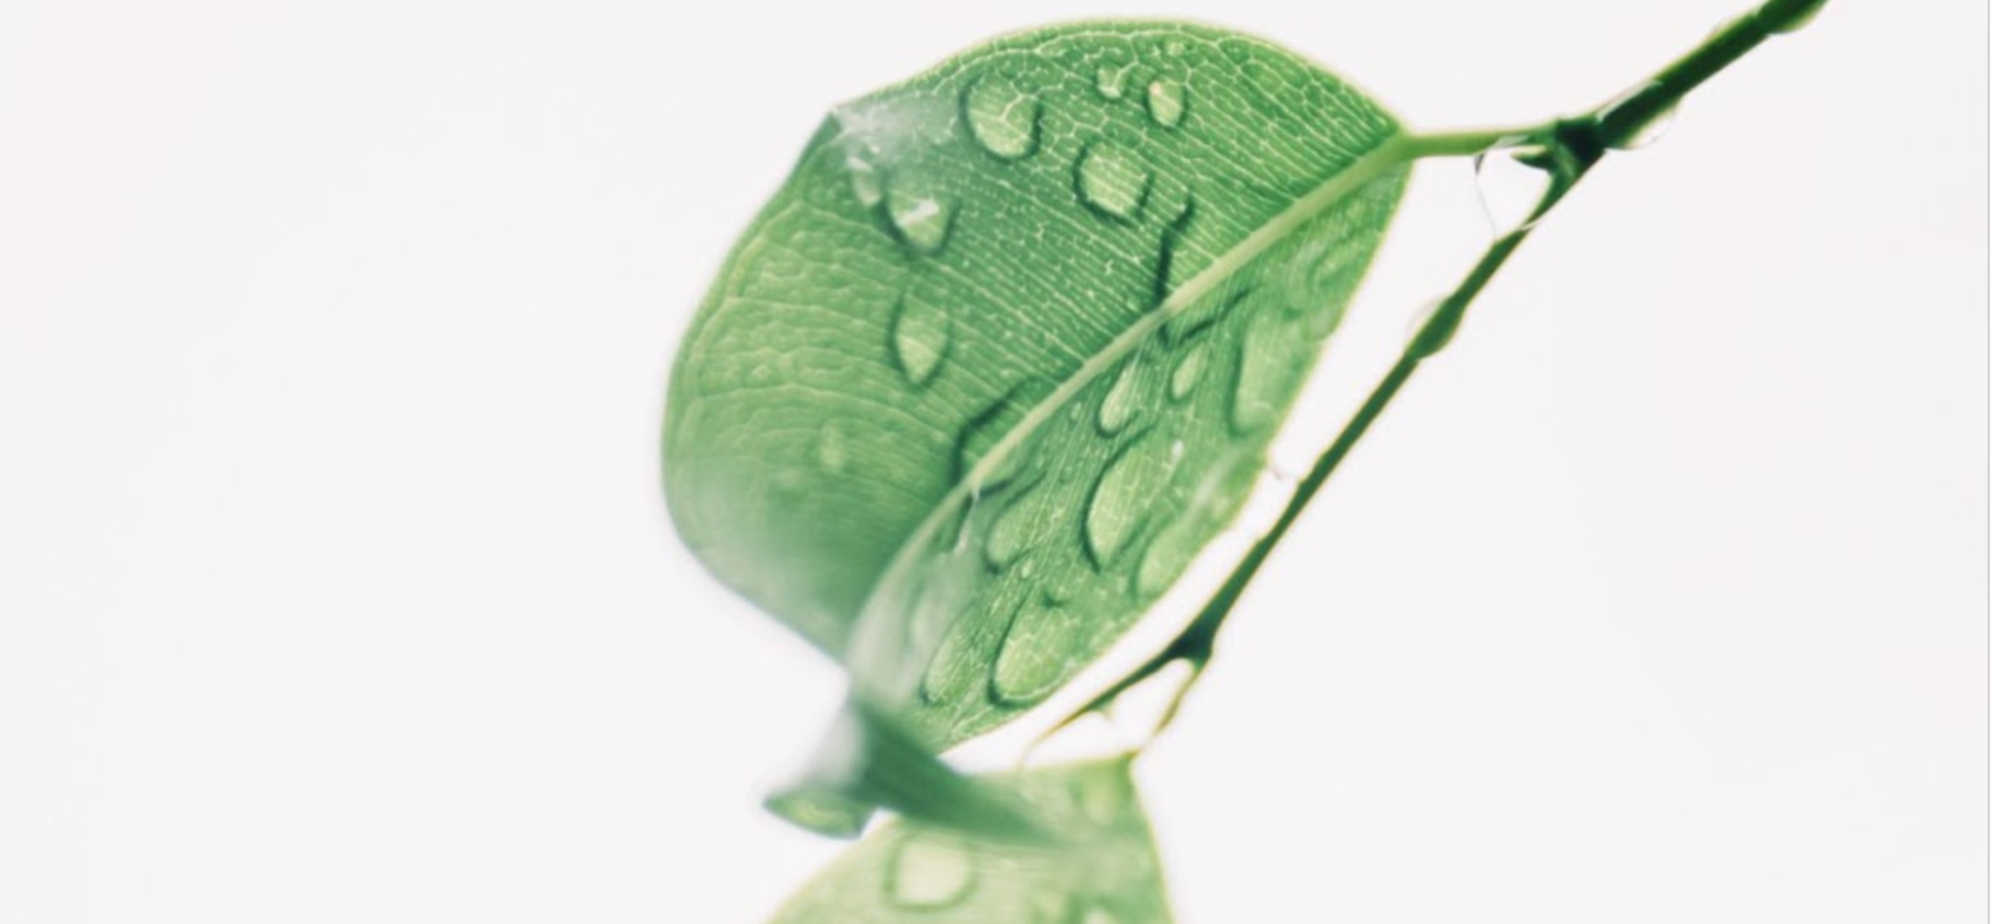 Clean leaf with water droplets